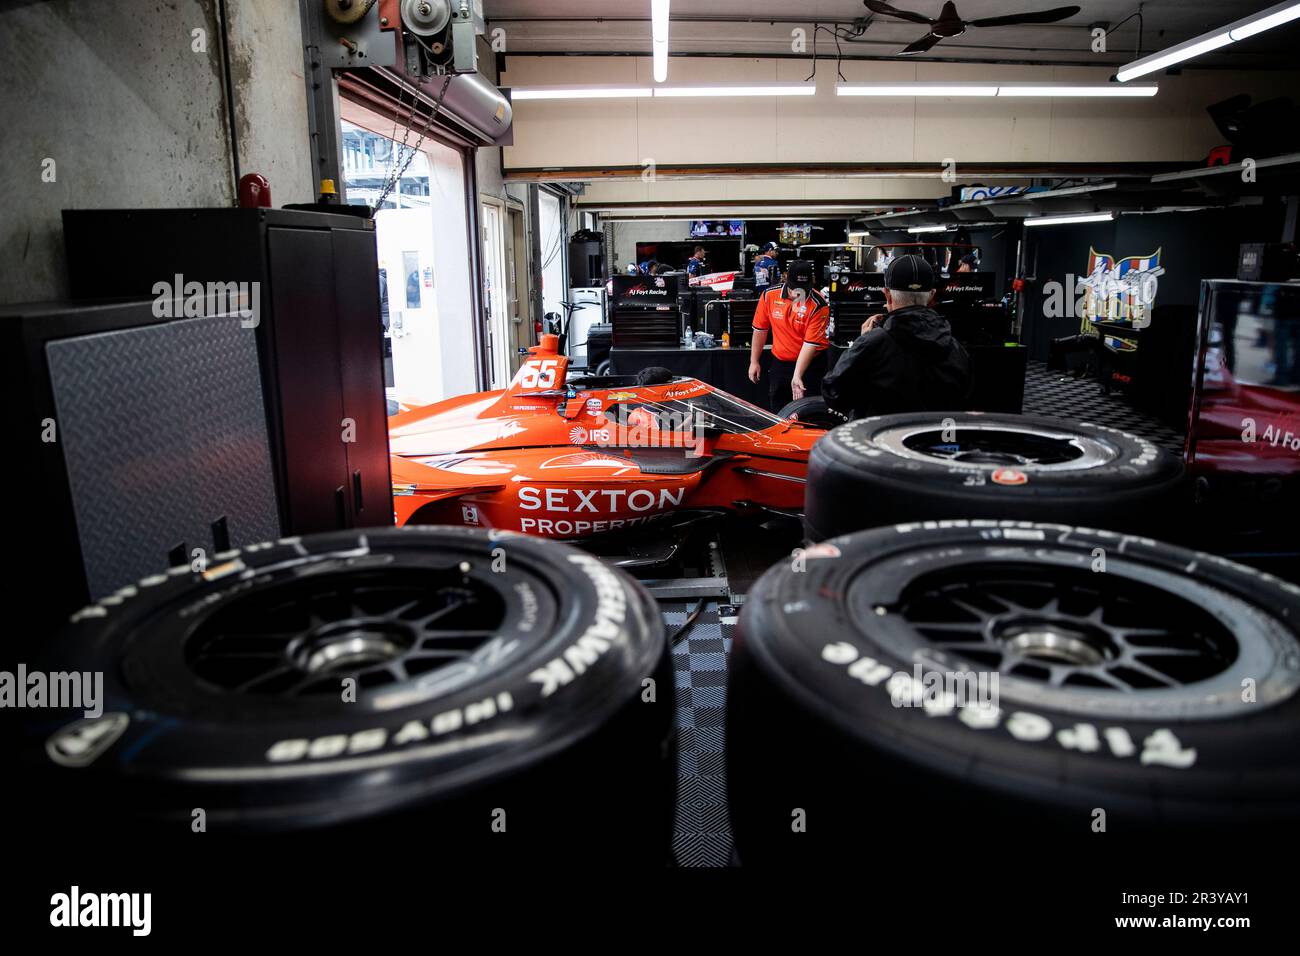 AJ Foyt Racing prepares for a practice session for the Indianapolis 500 at Indianapolis Motor Speedway in Speedway IN. Stock Photo